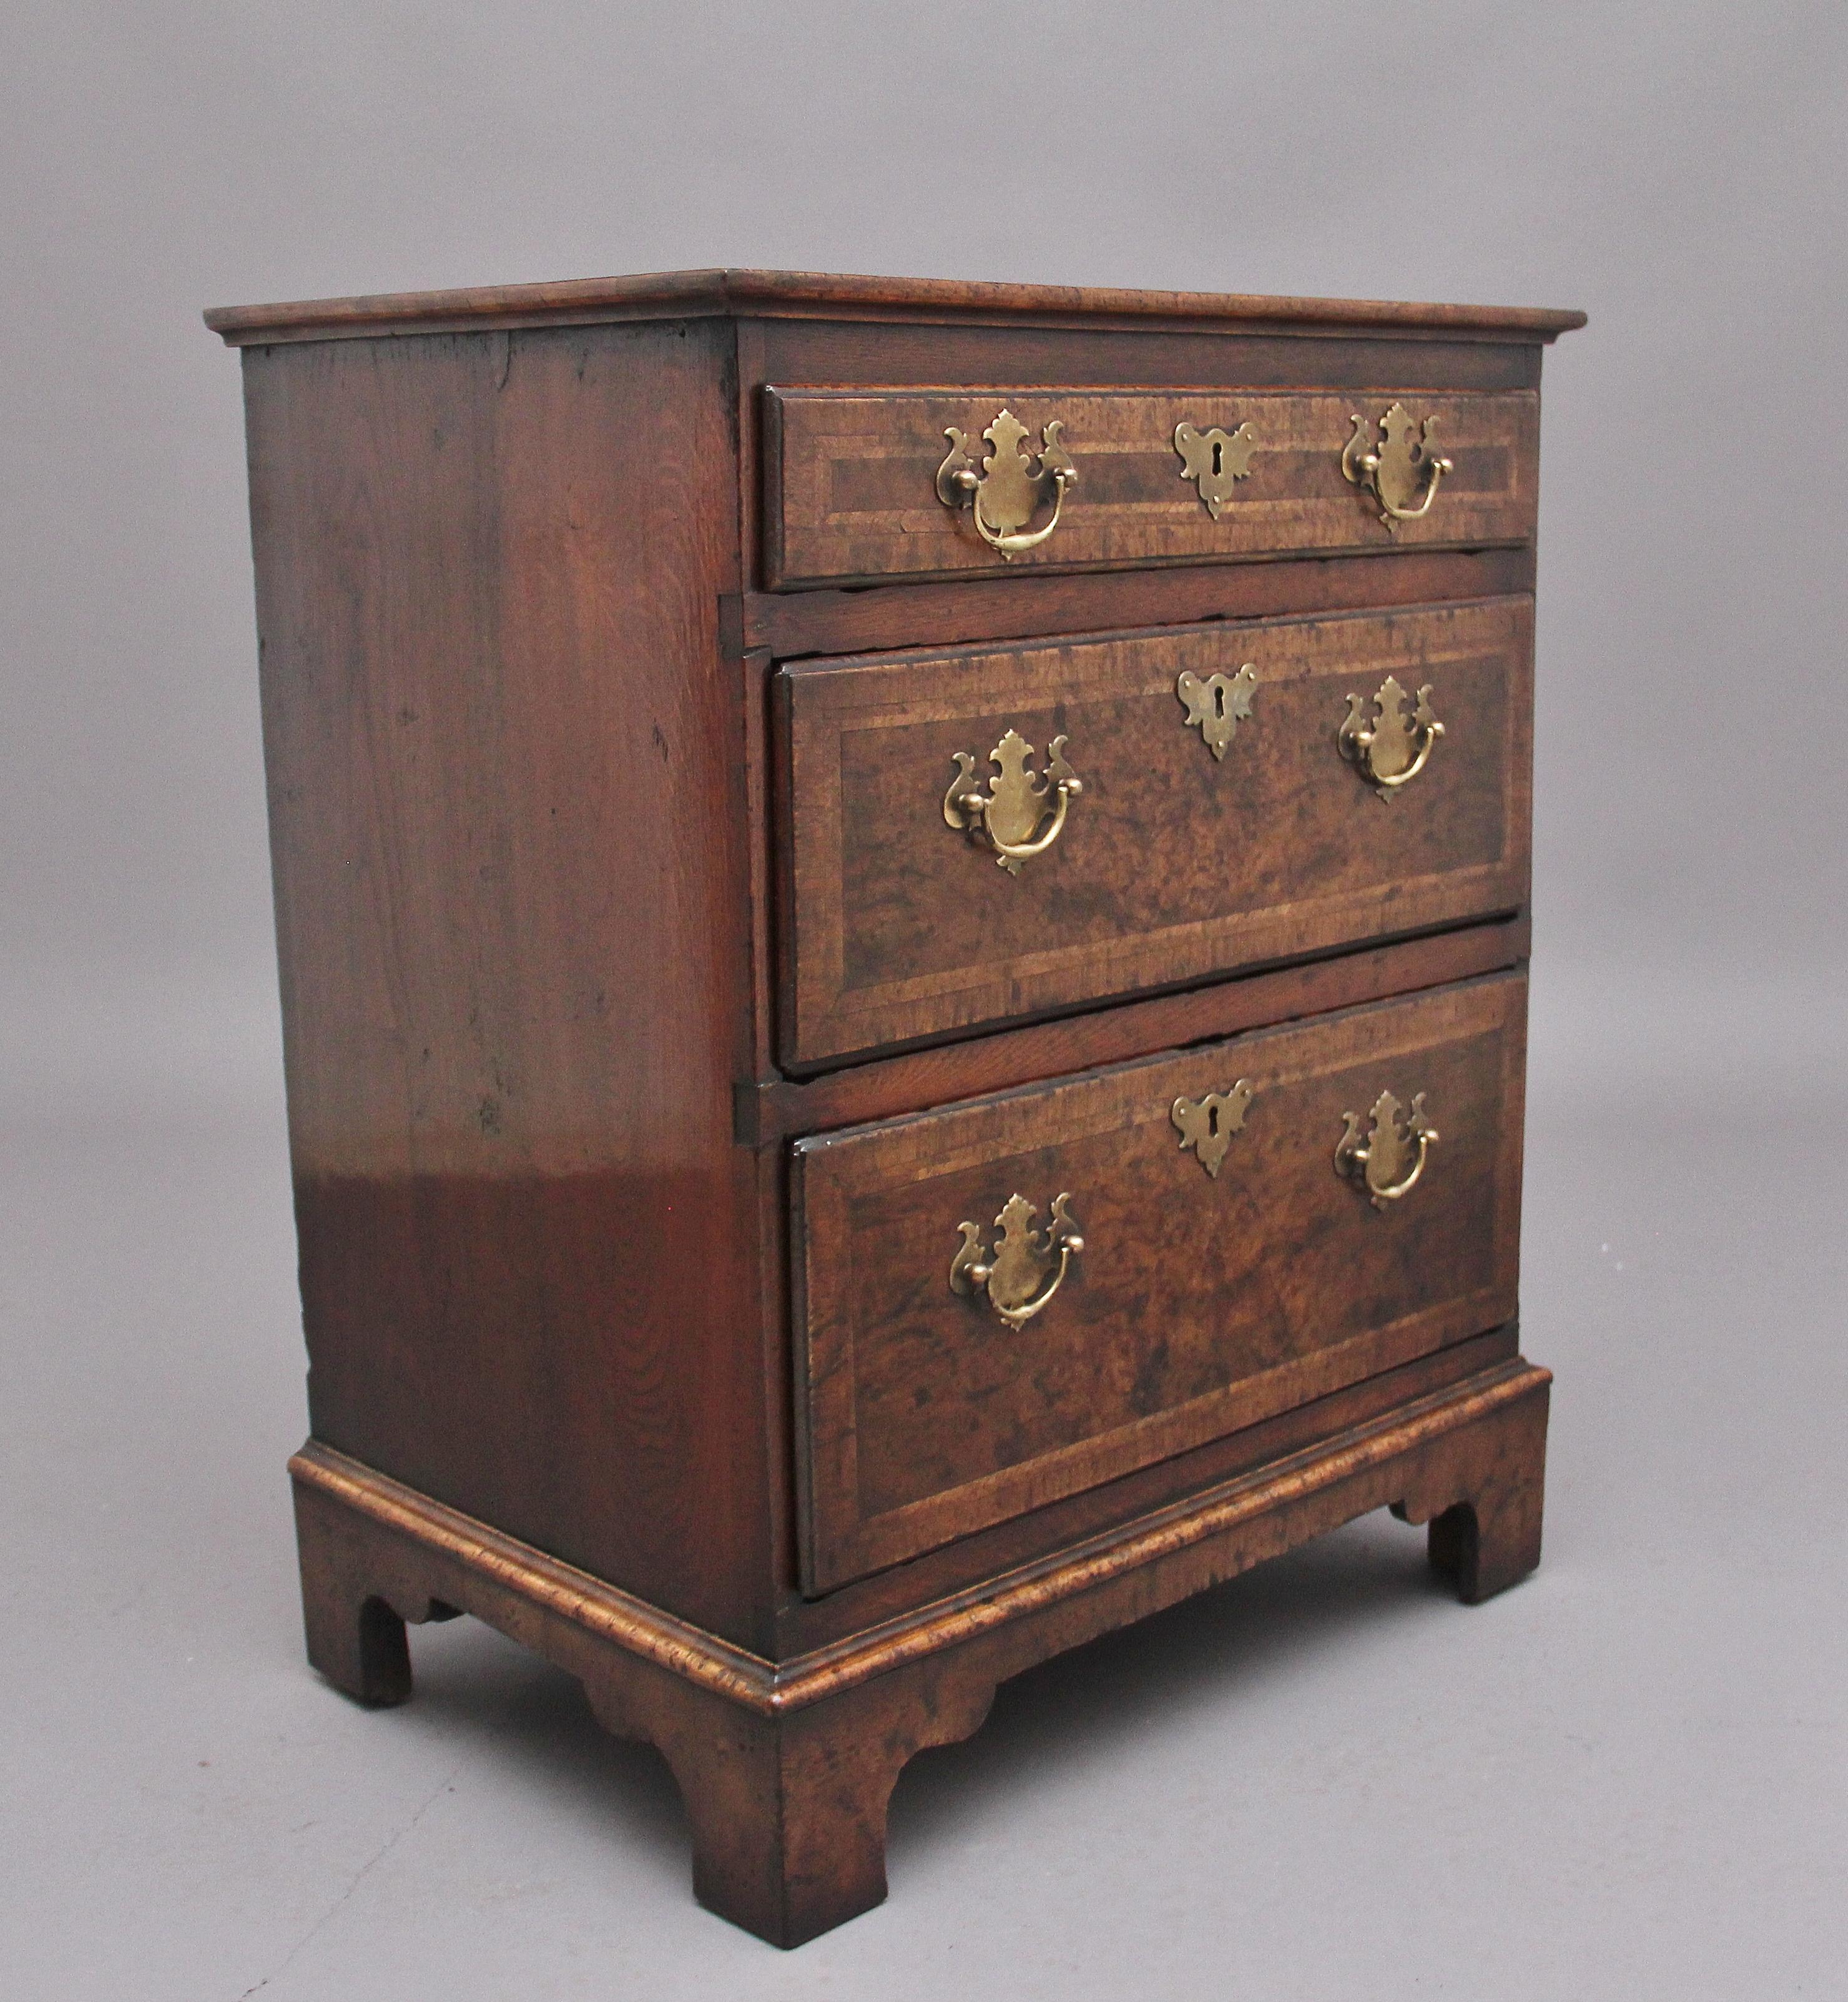 18th Century walnut chest of drawers which has been re- veneered in the early 20th Century, the crossbanded quarter veneered top above a selection of three long graduated drawers, with brass plate handles and escutcheons, the drawer fronts are also